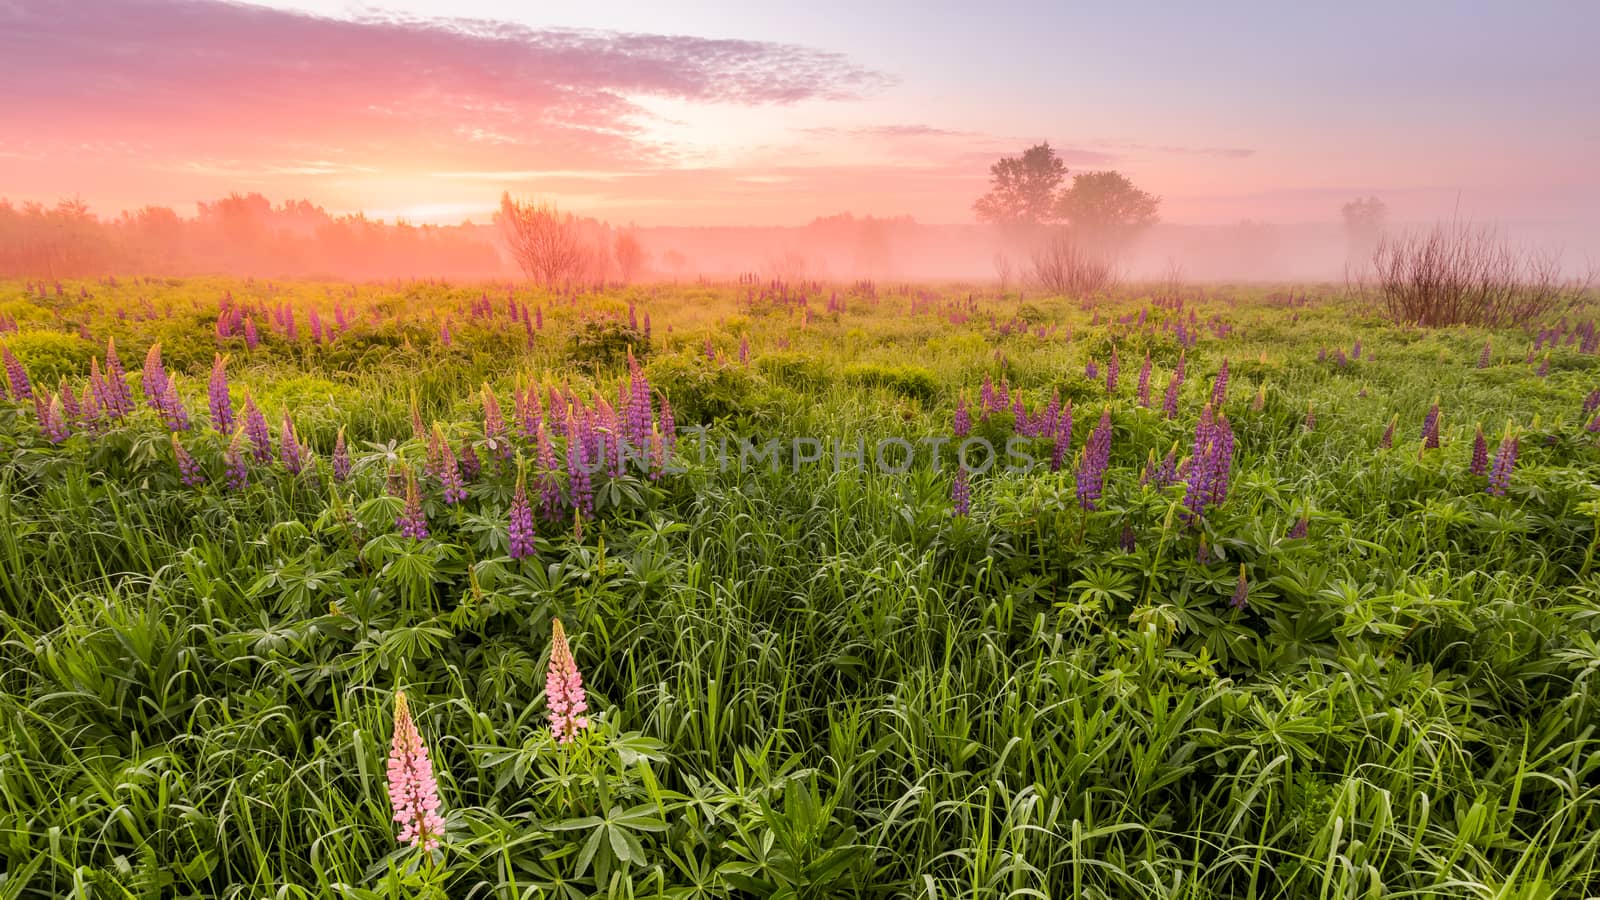 Twilight on a field covered with flowering lupines in spring or early summer season with fog and trees on a background in morning. Panorama.